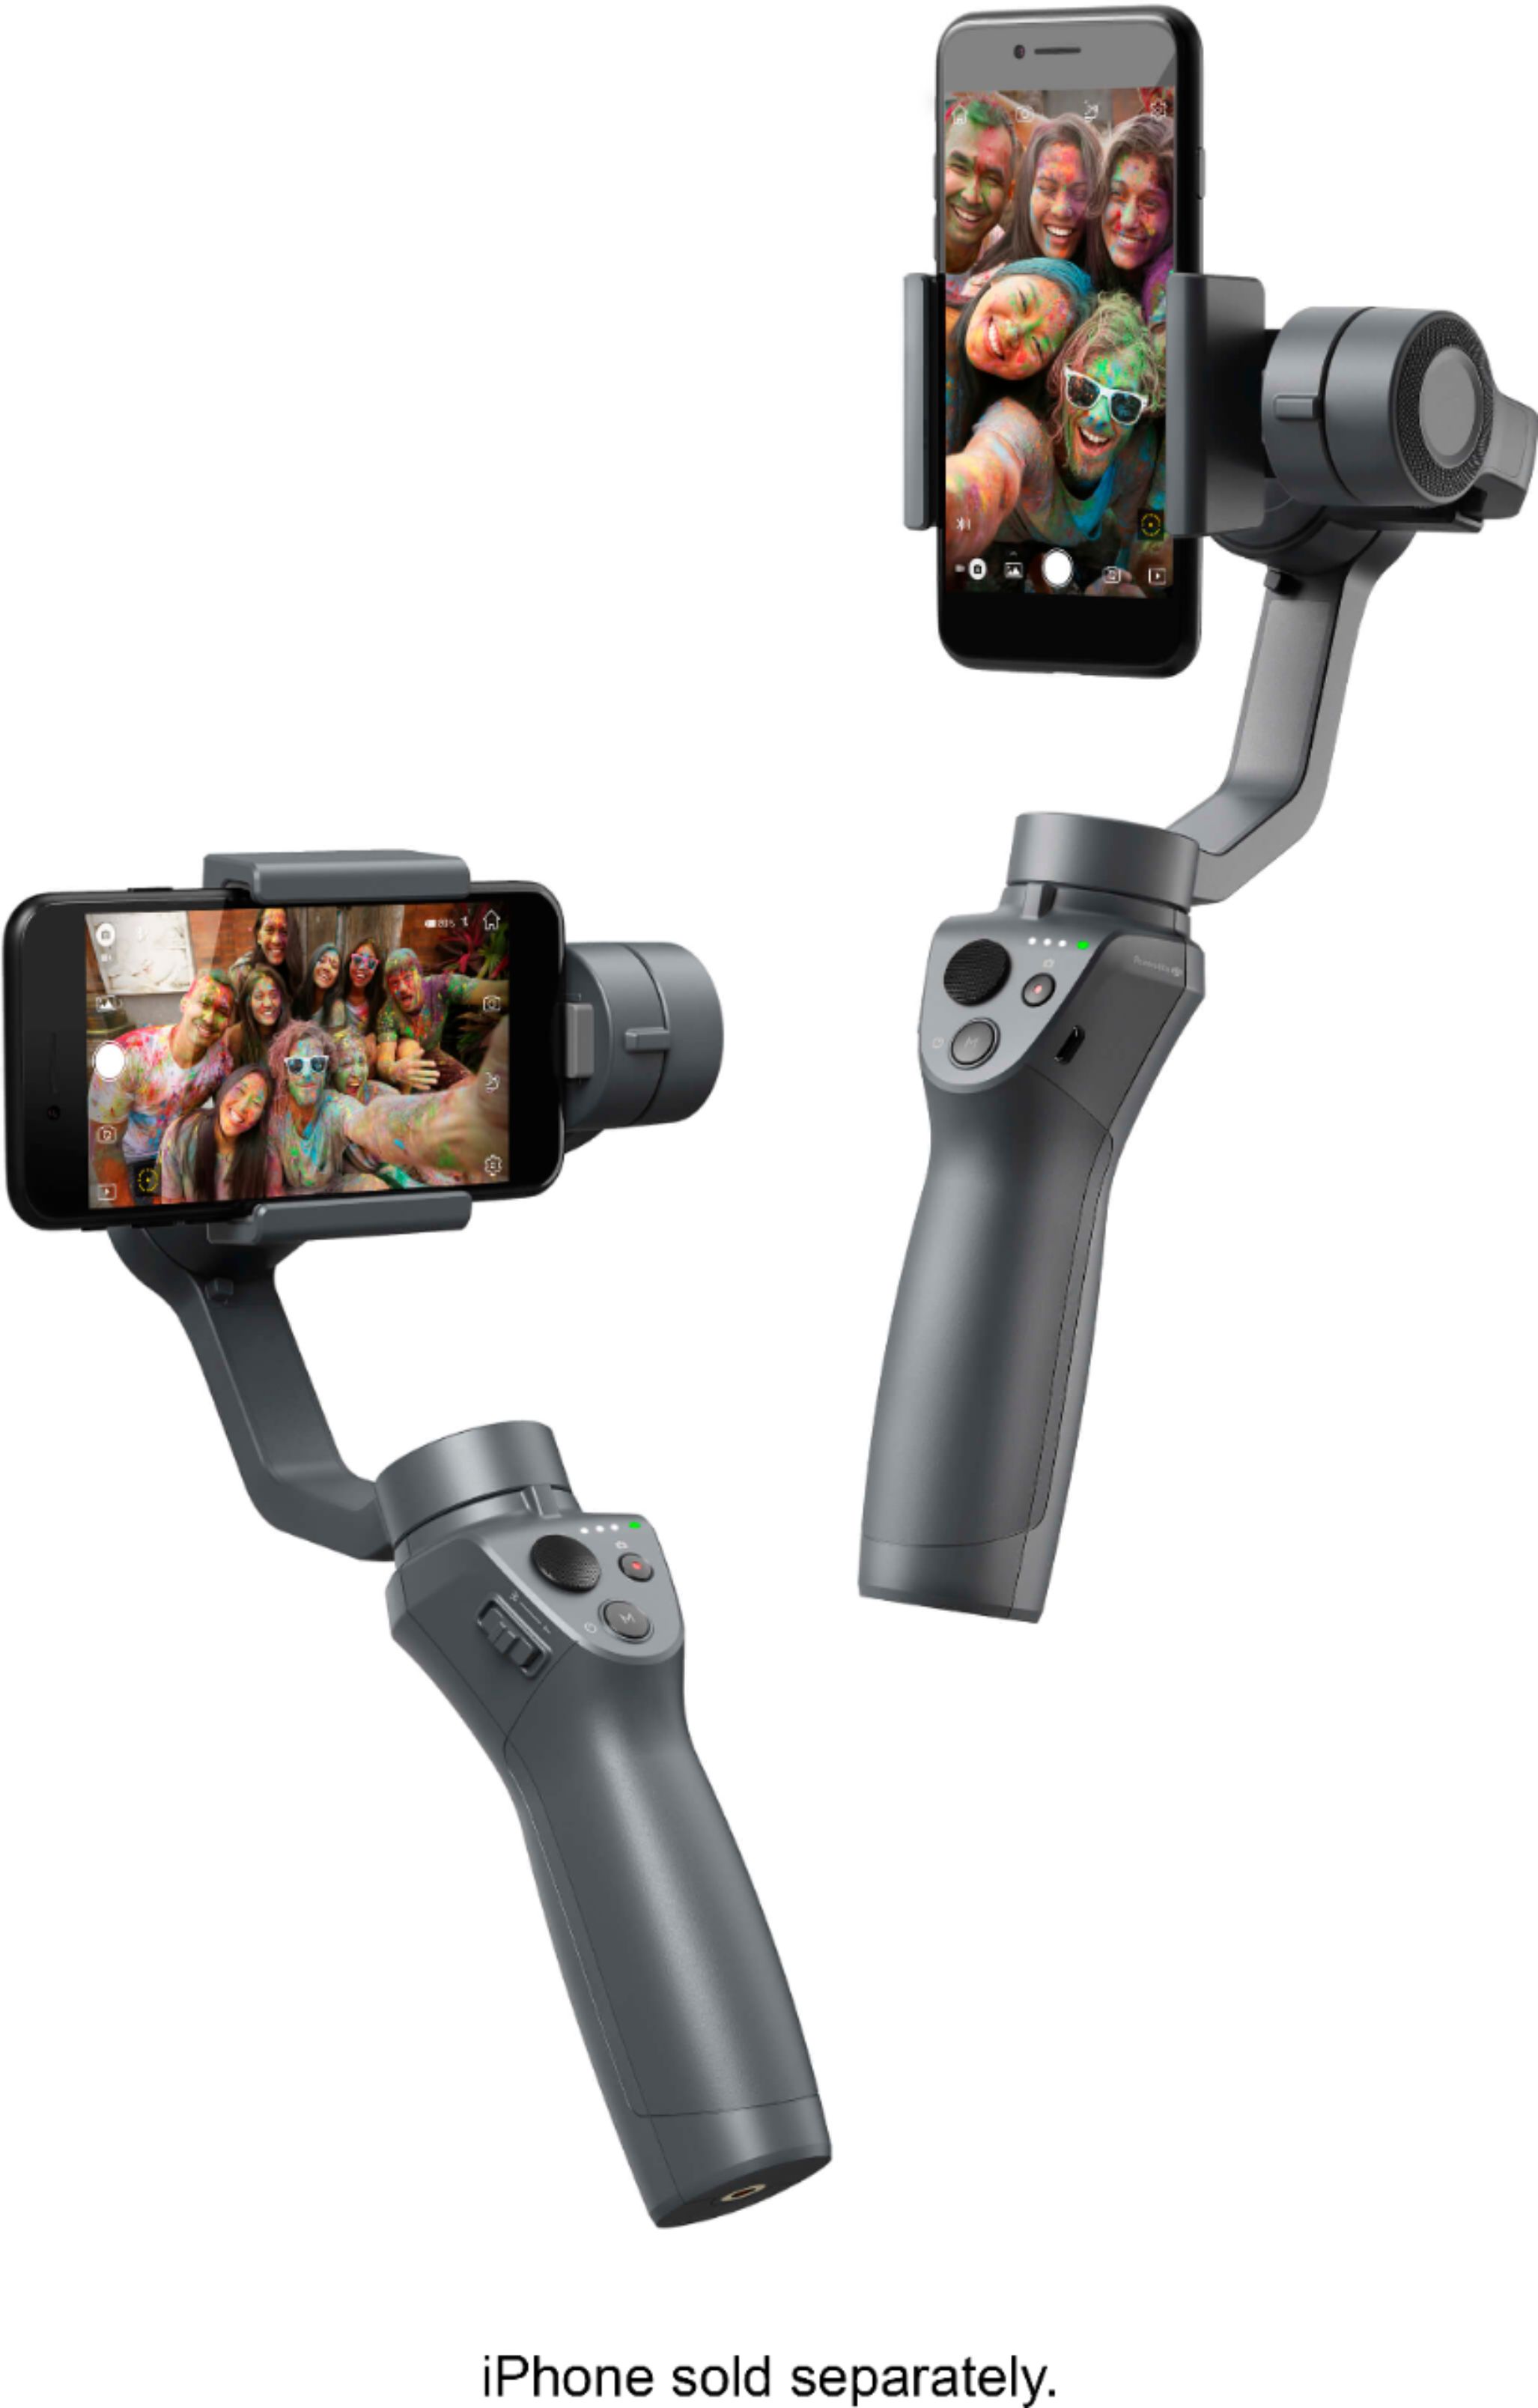 Best Buy: DJI Osmo Mobile 2 3-Axis Gimbal Stabilizer for Mobile